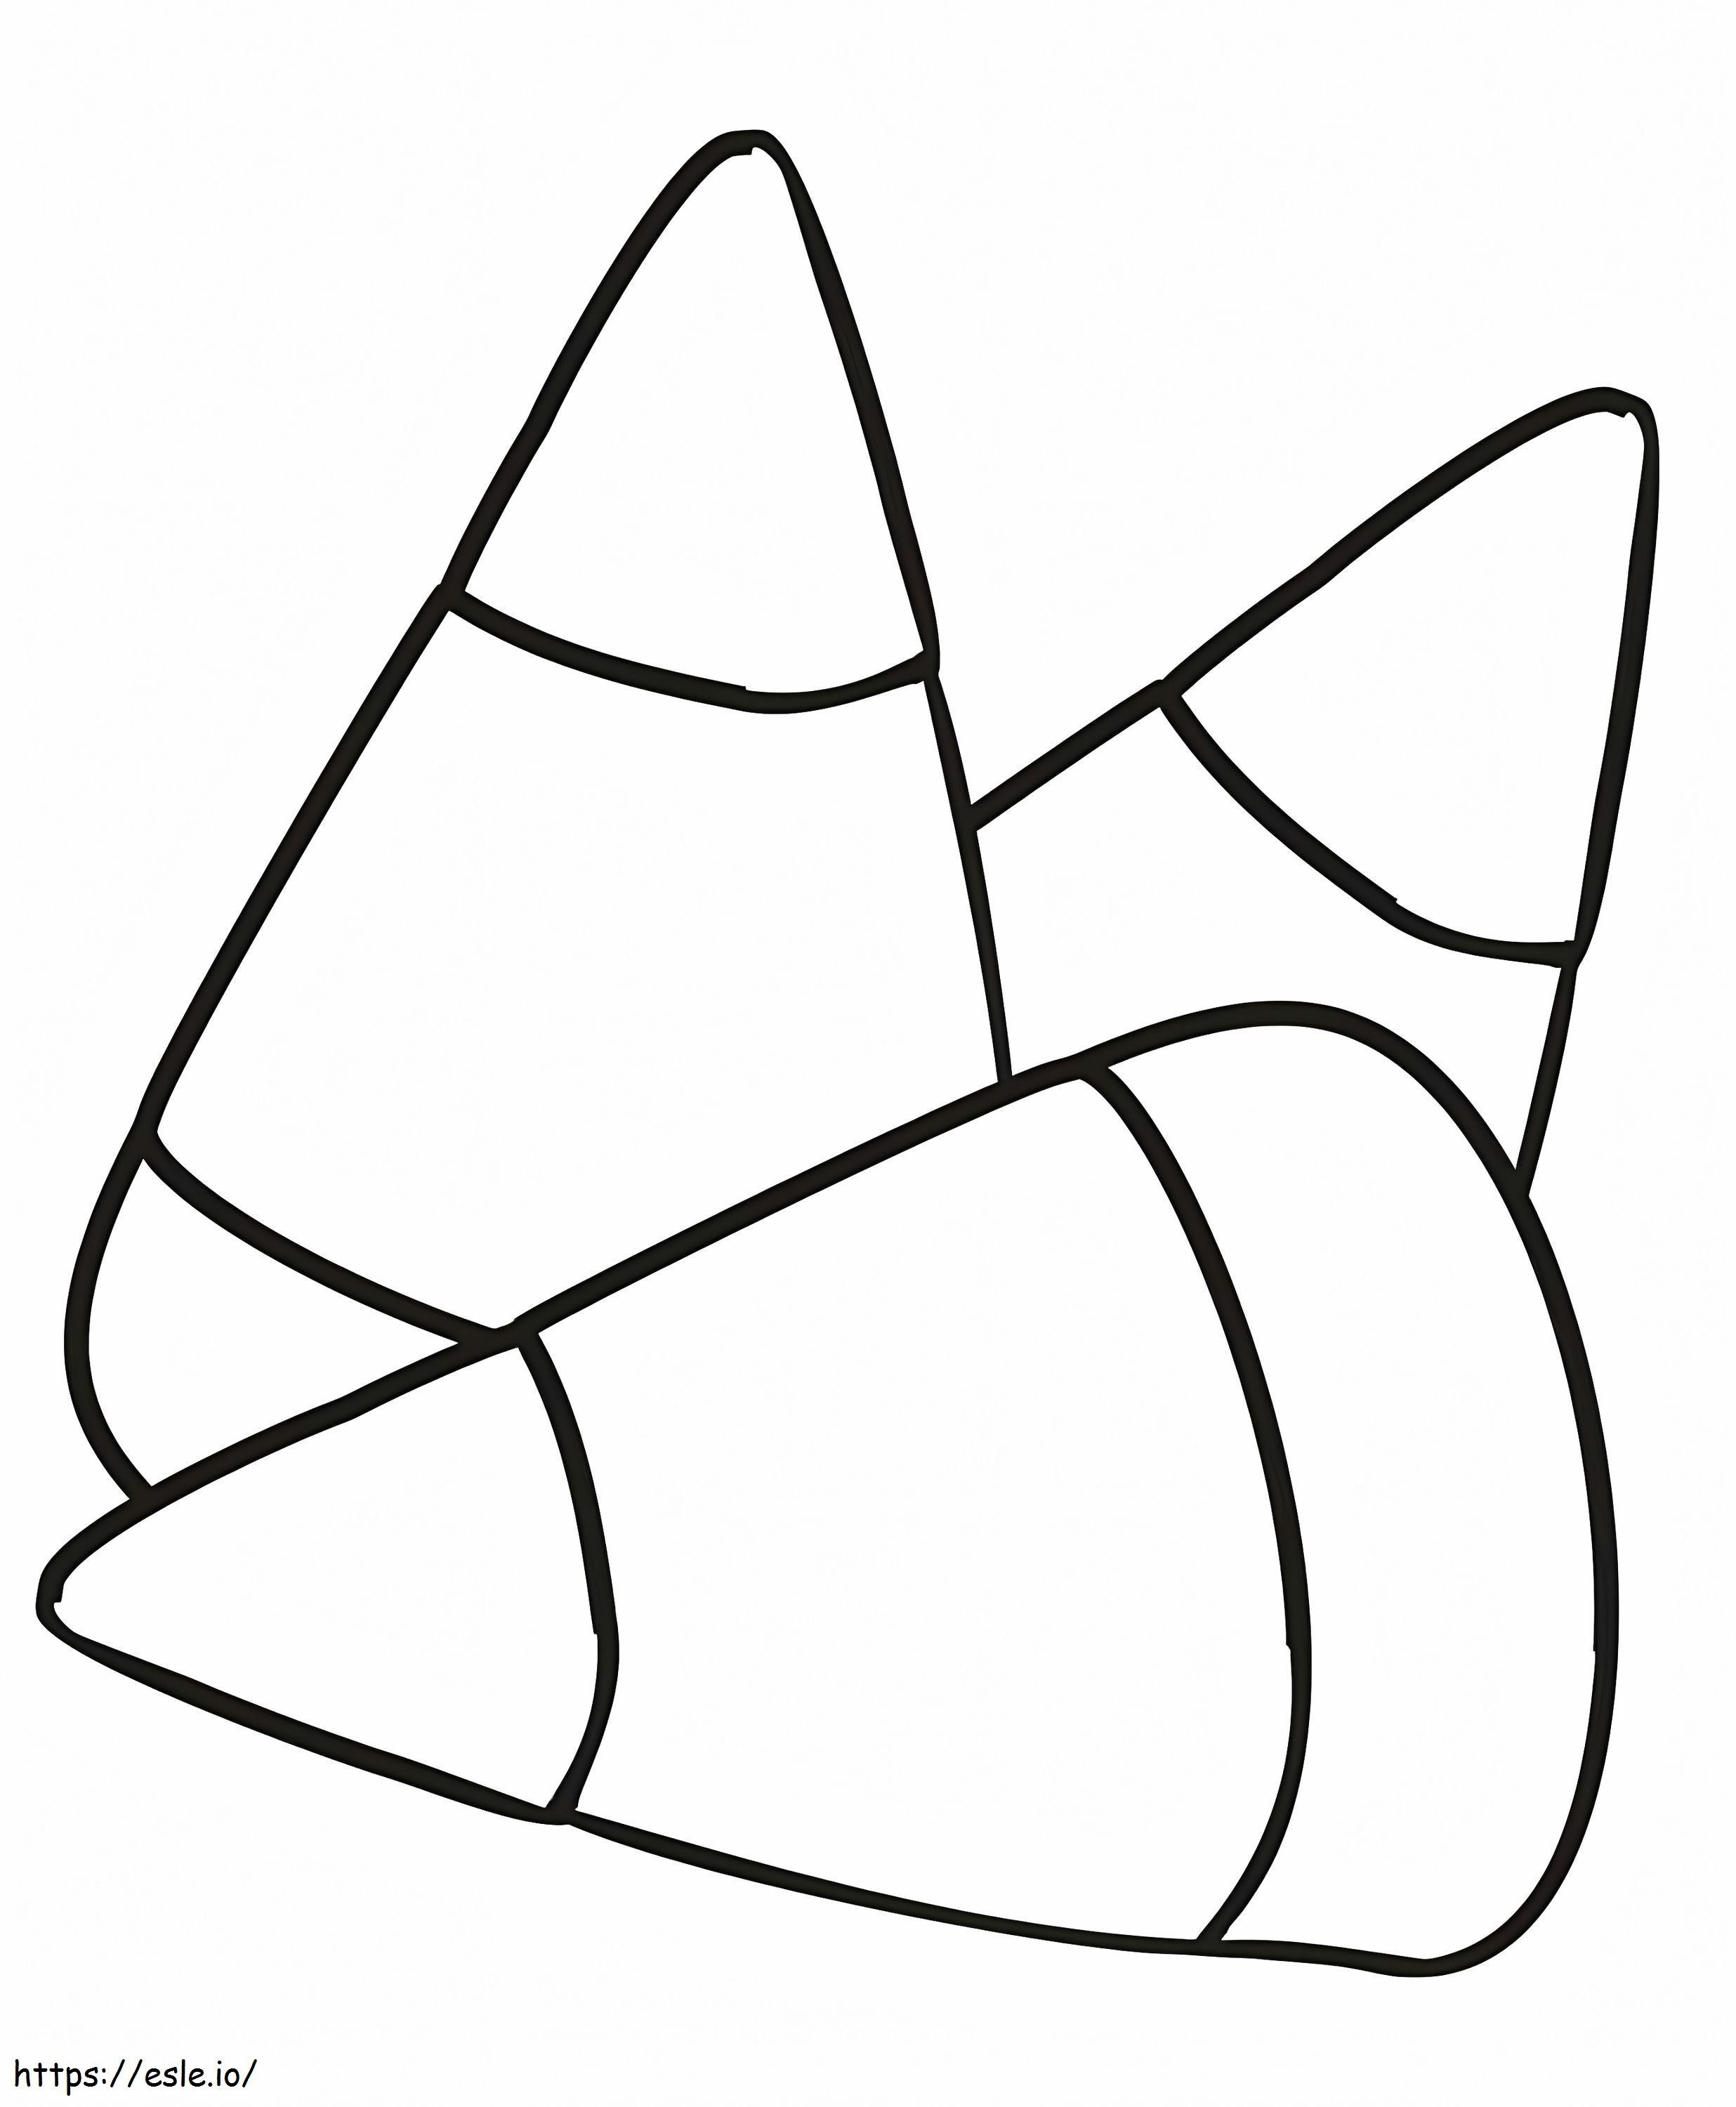 Three Simple Candy Corn coloring page